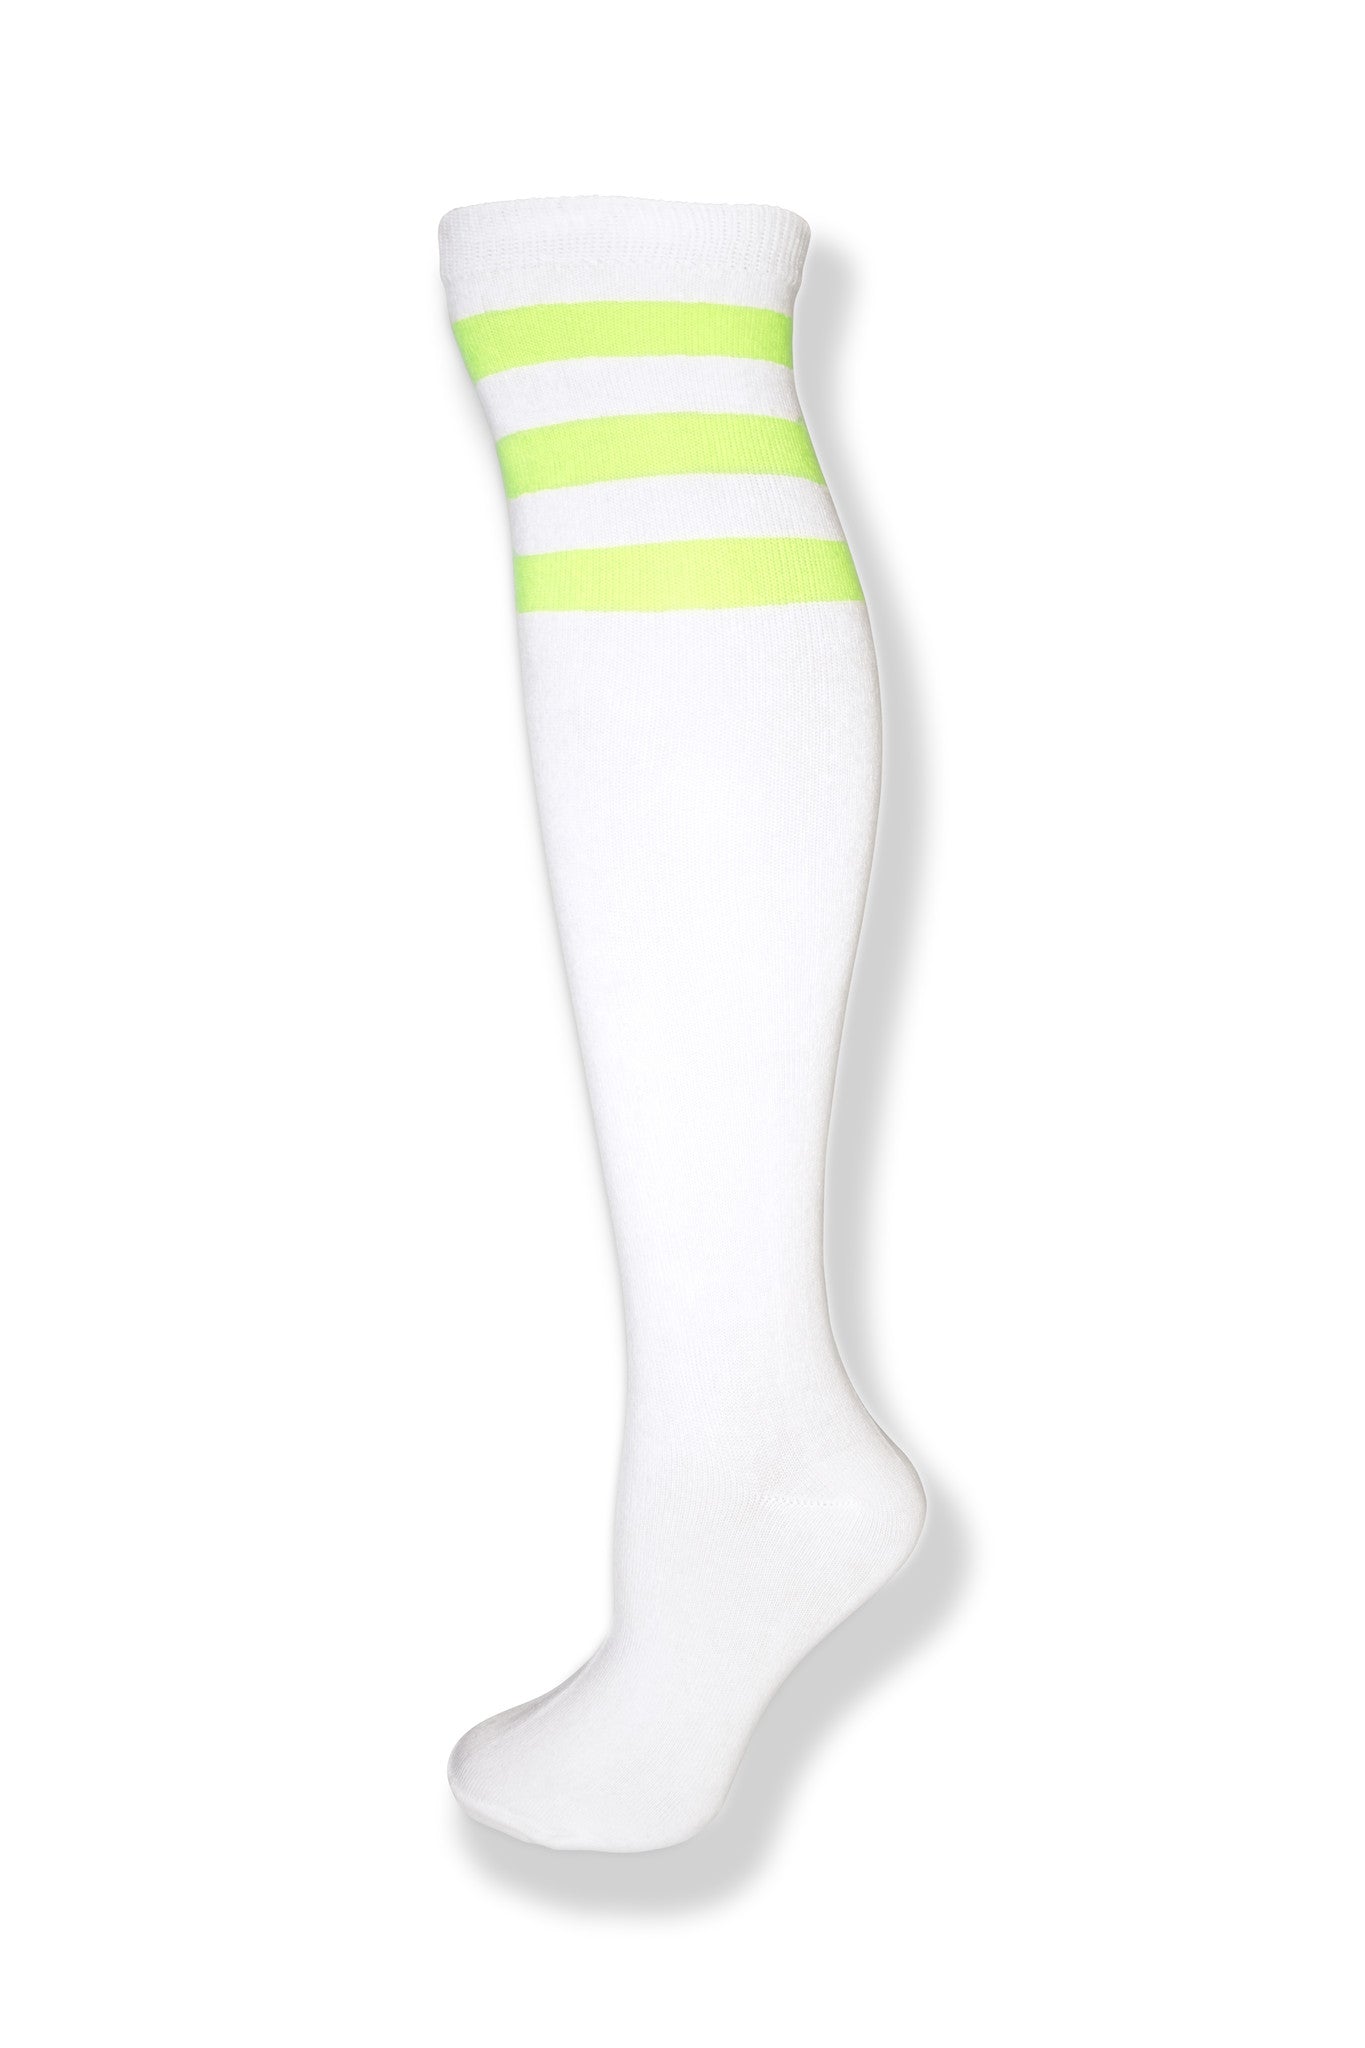 White with Neon Green Stripes Knee High Sock